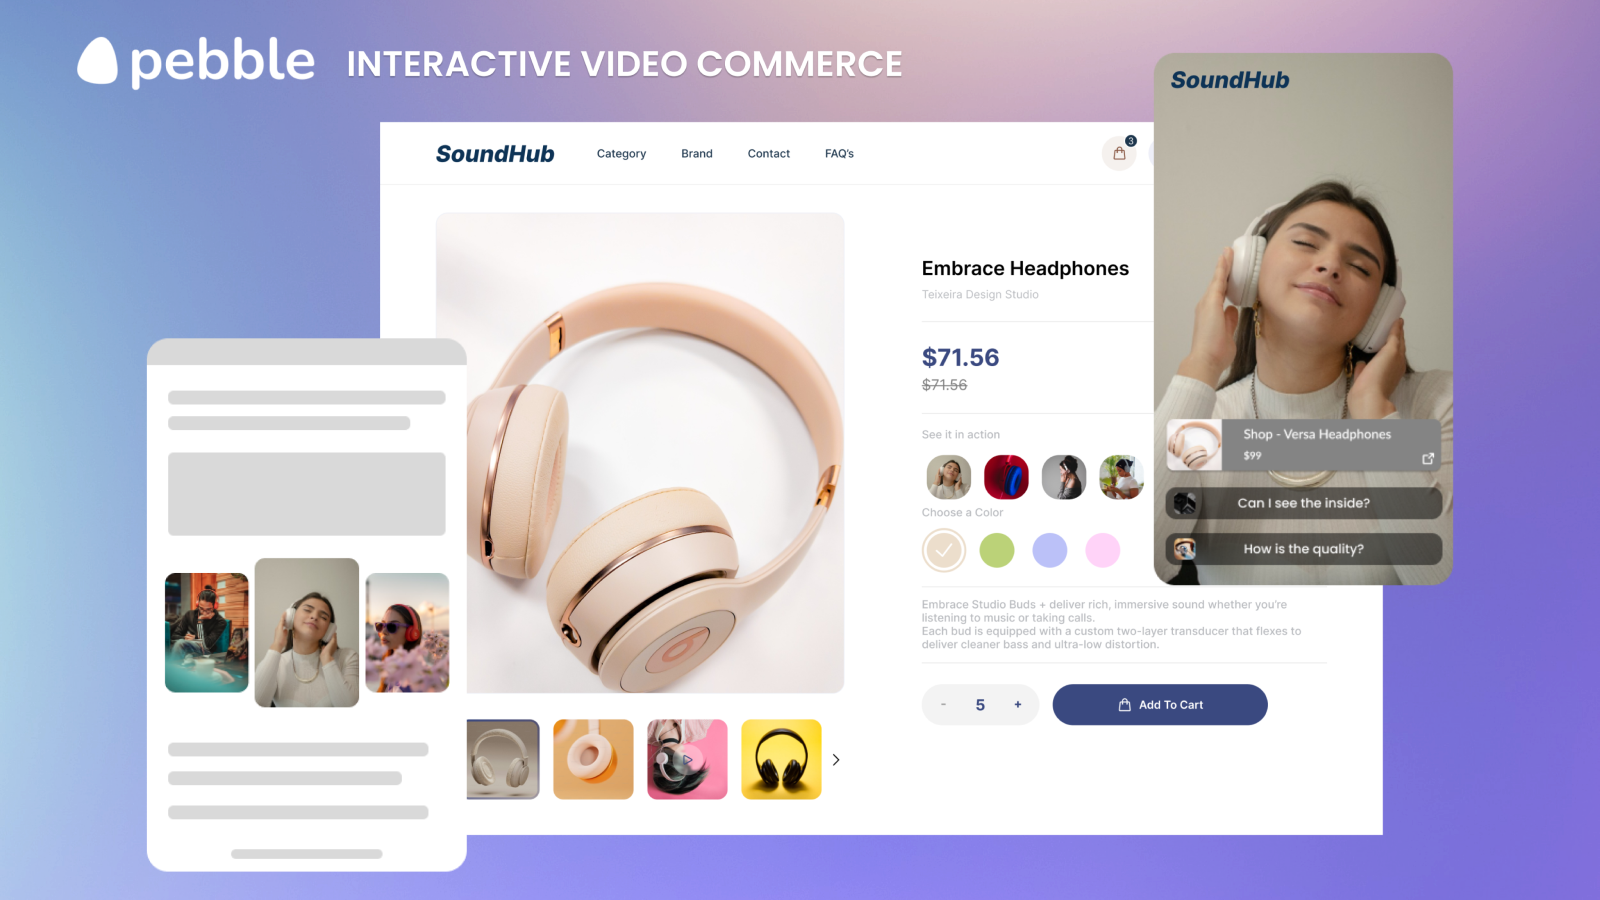 Video commerce made shoppable